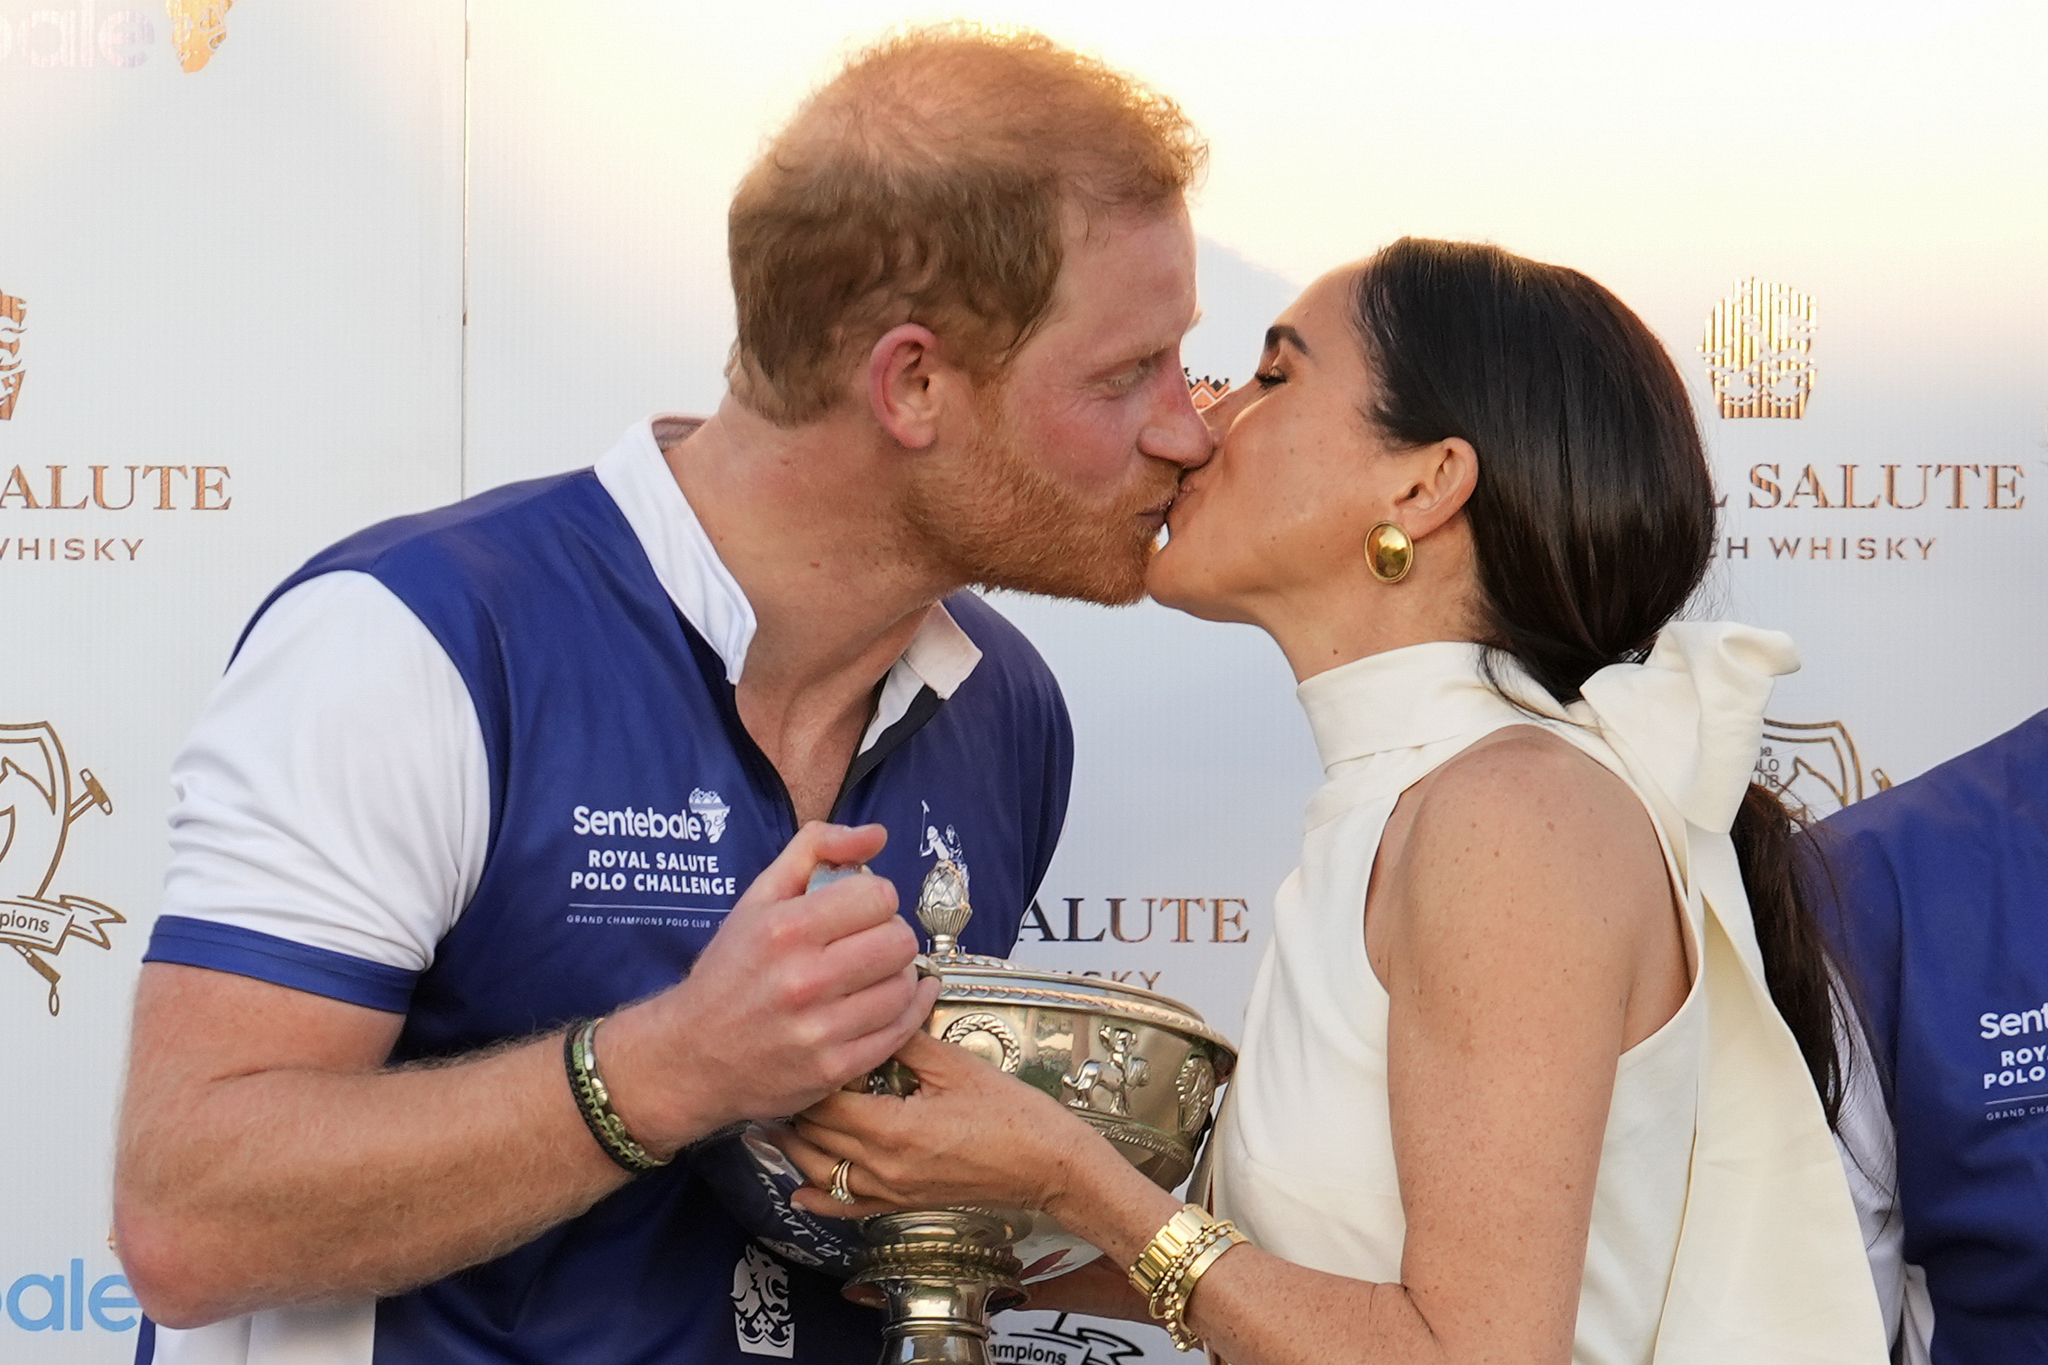 Prince Harry and wife Meghan Markle, Duchess of Sussex, kiss